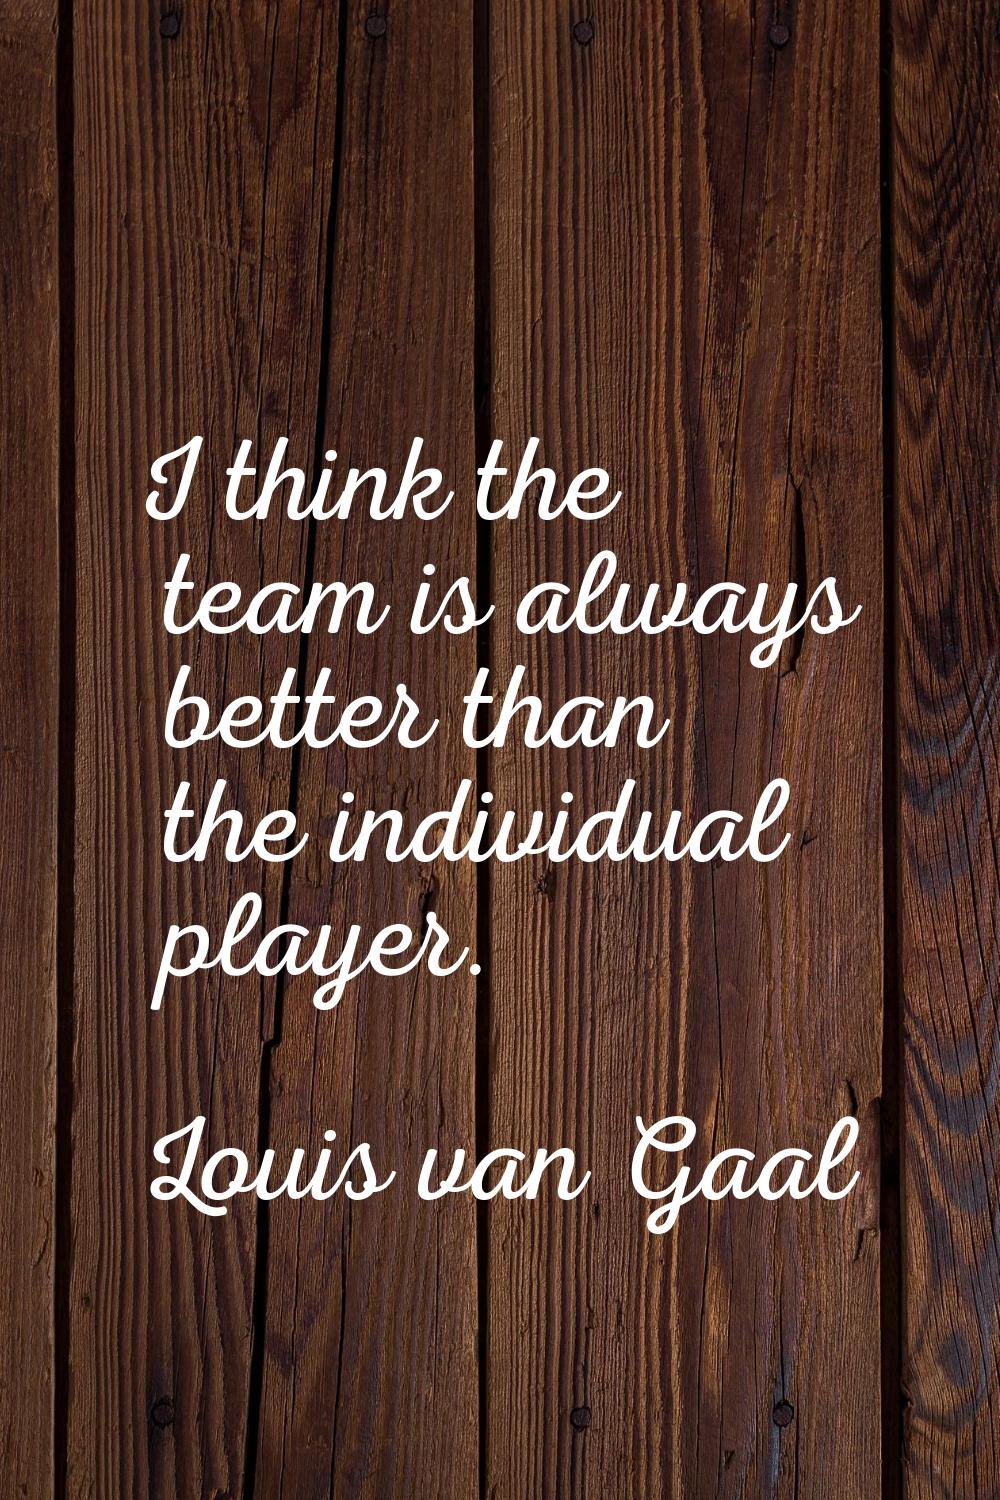 I think the team is always better than the individual player.